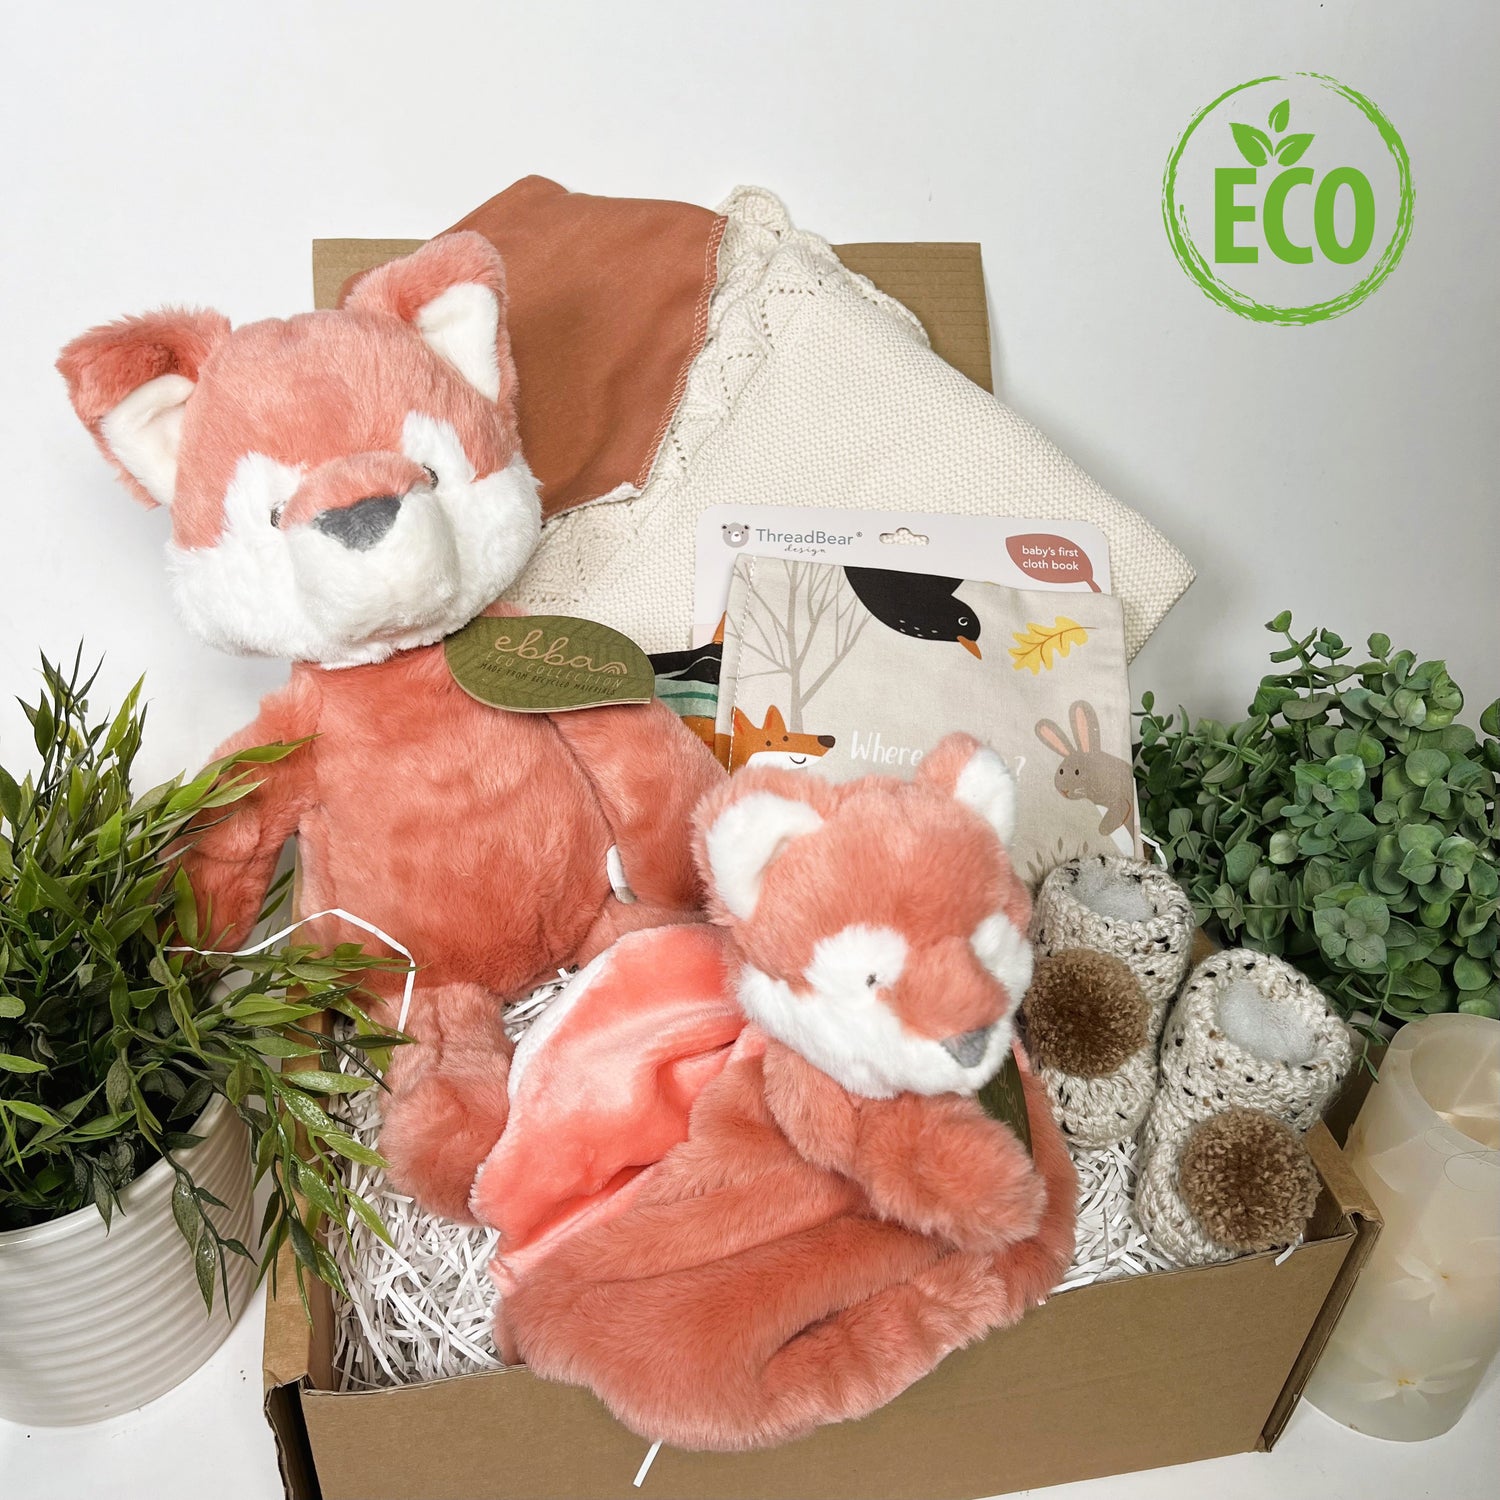 Neutral New Baby shower gift full of eco freindly items including a cotton baby blanket, a cloth baby book, an Ebba Fox soft toy and Ebba fox baby comforter, a cotton baby bib and a pair of crocheted baby booties with pompoms.